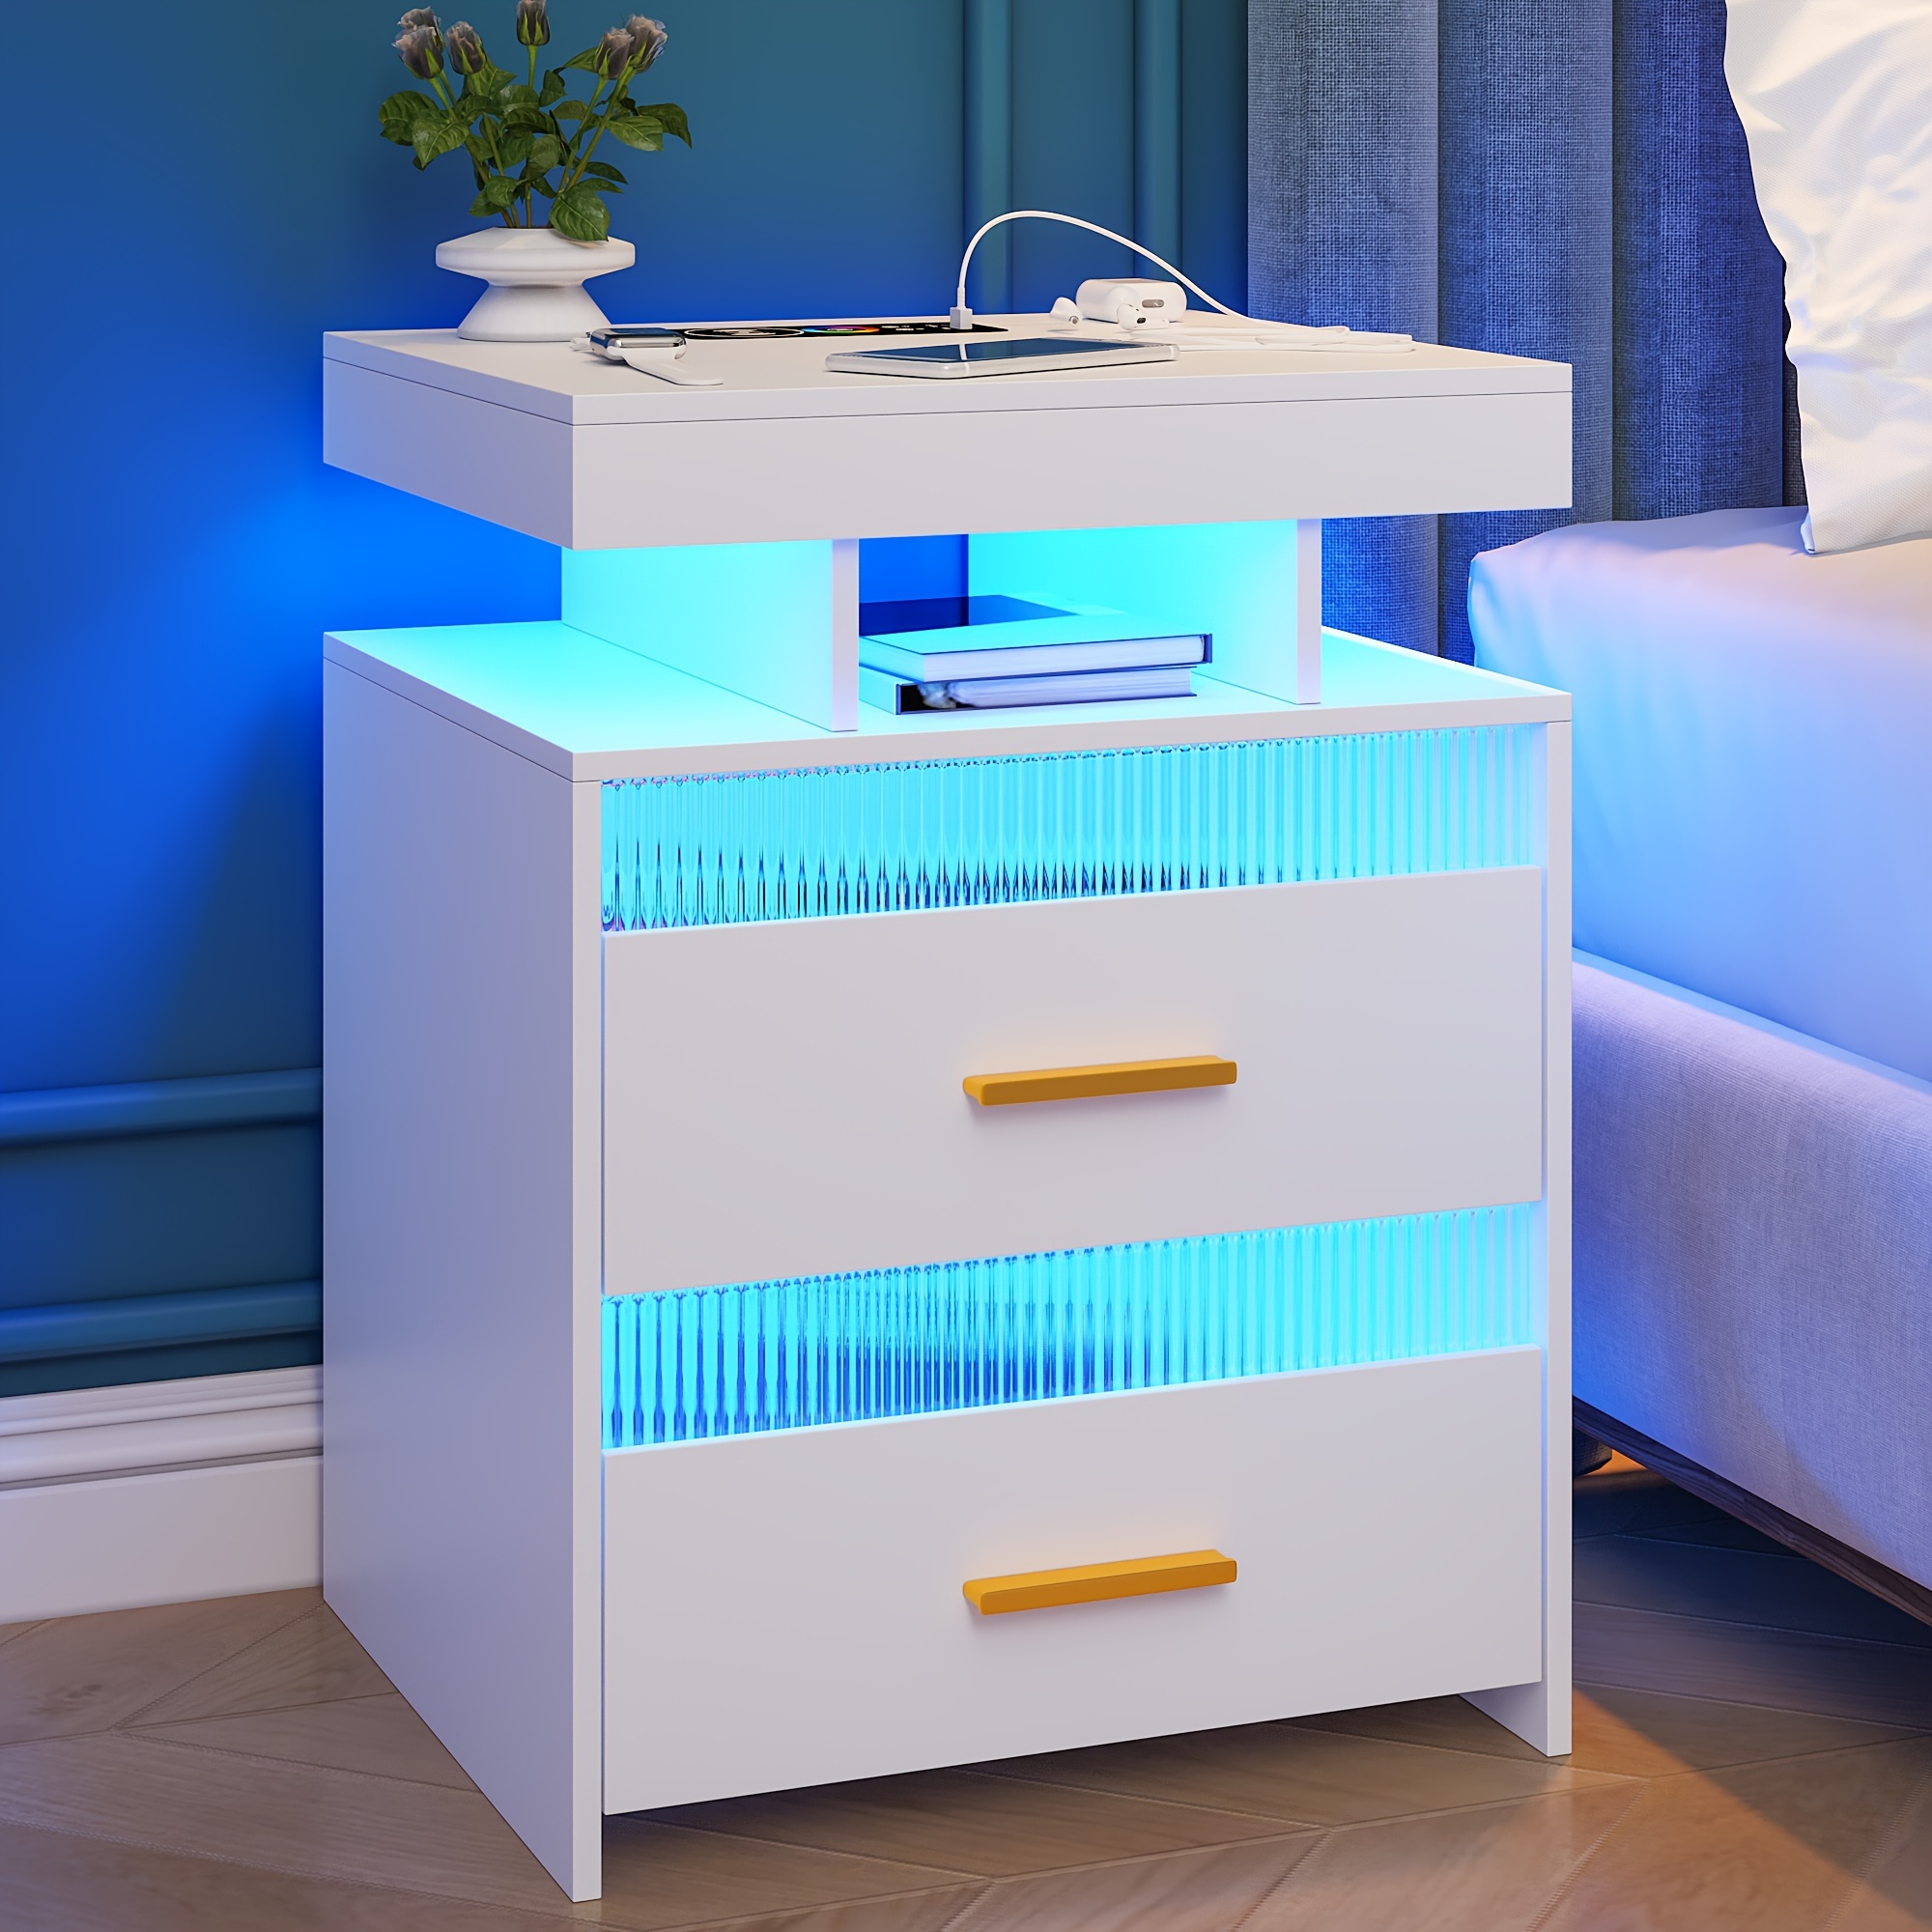 

Hnebc Night Stand With Rgb Lights, Smart Nightstand With Wireless Charging Station, Led Bedside Table With Sensor Lights And 2 Storage Drawers, Modern Bedroom Furniture